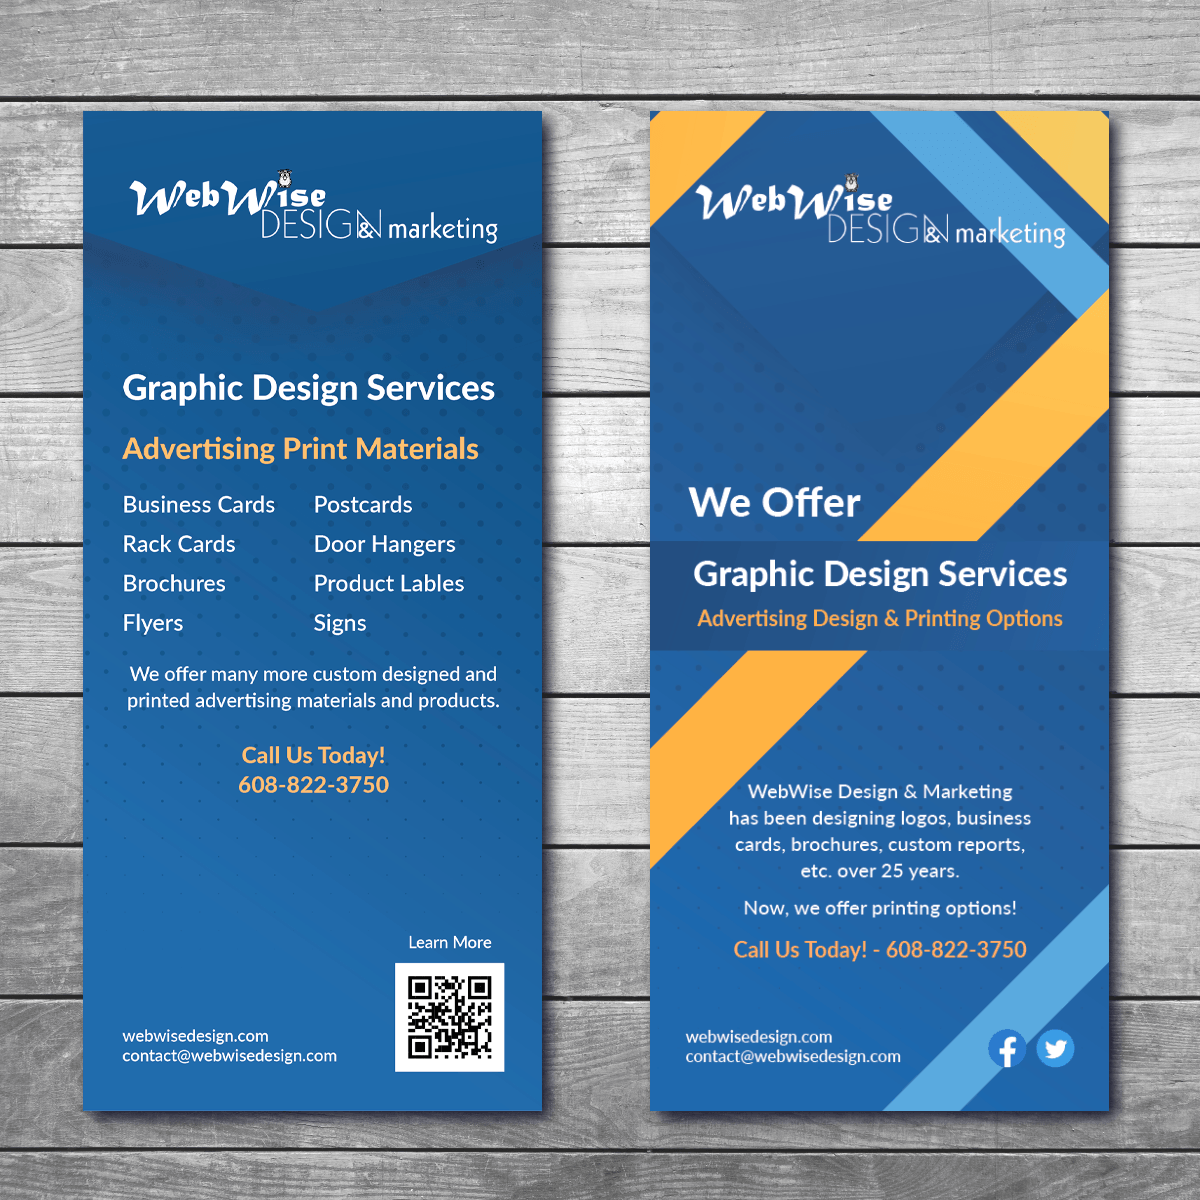 WebWise Design - Graphic Design Services Rack Card